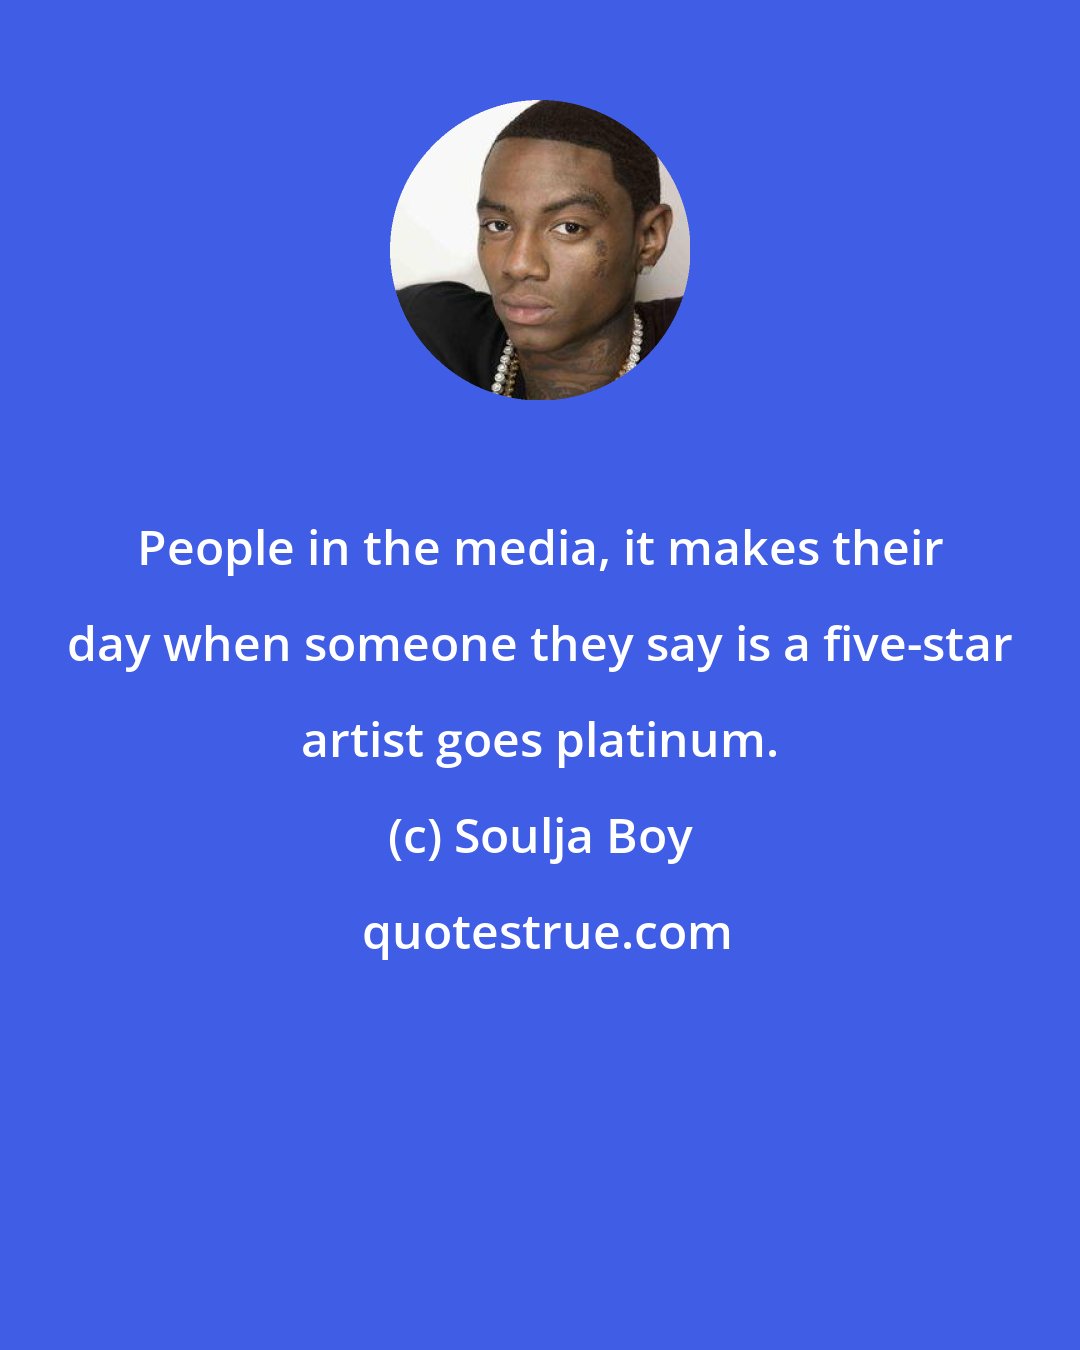 Soulja Boy: People in the media, it makes their day when someone they say is a five-star artist goes platinum.